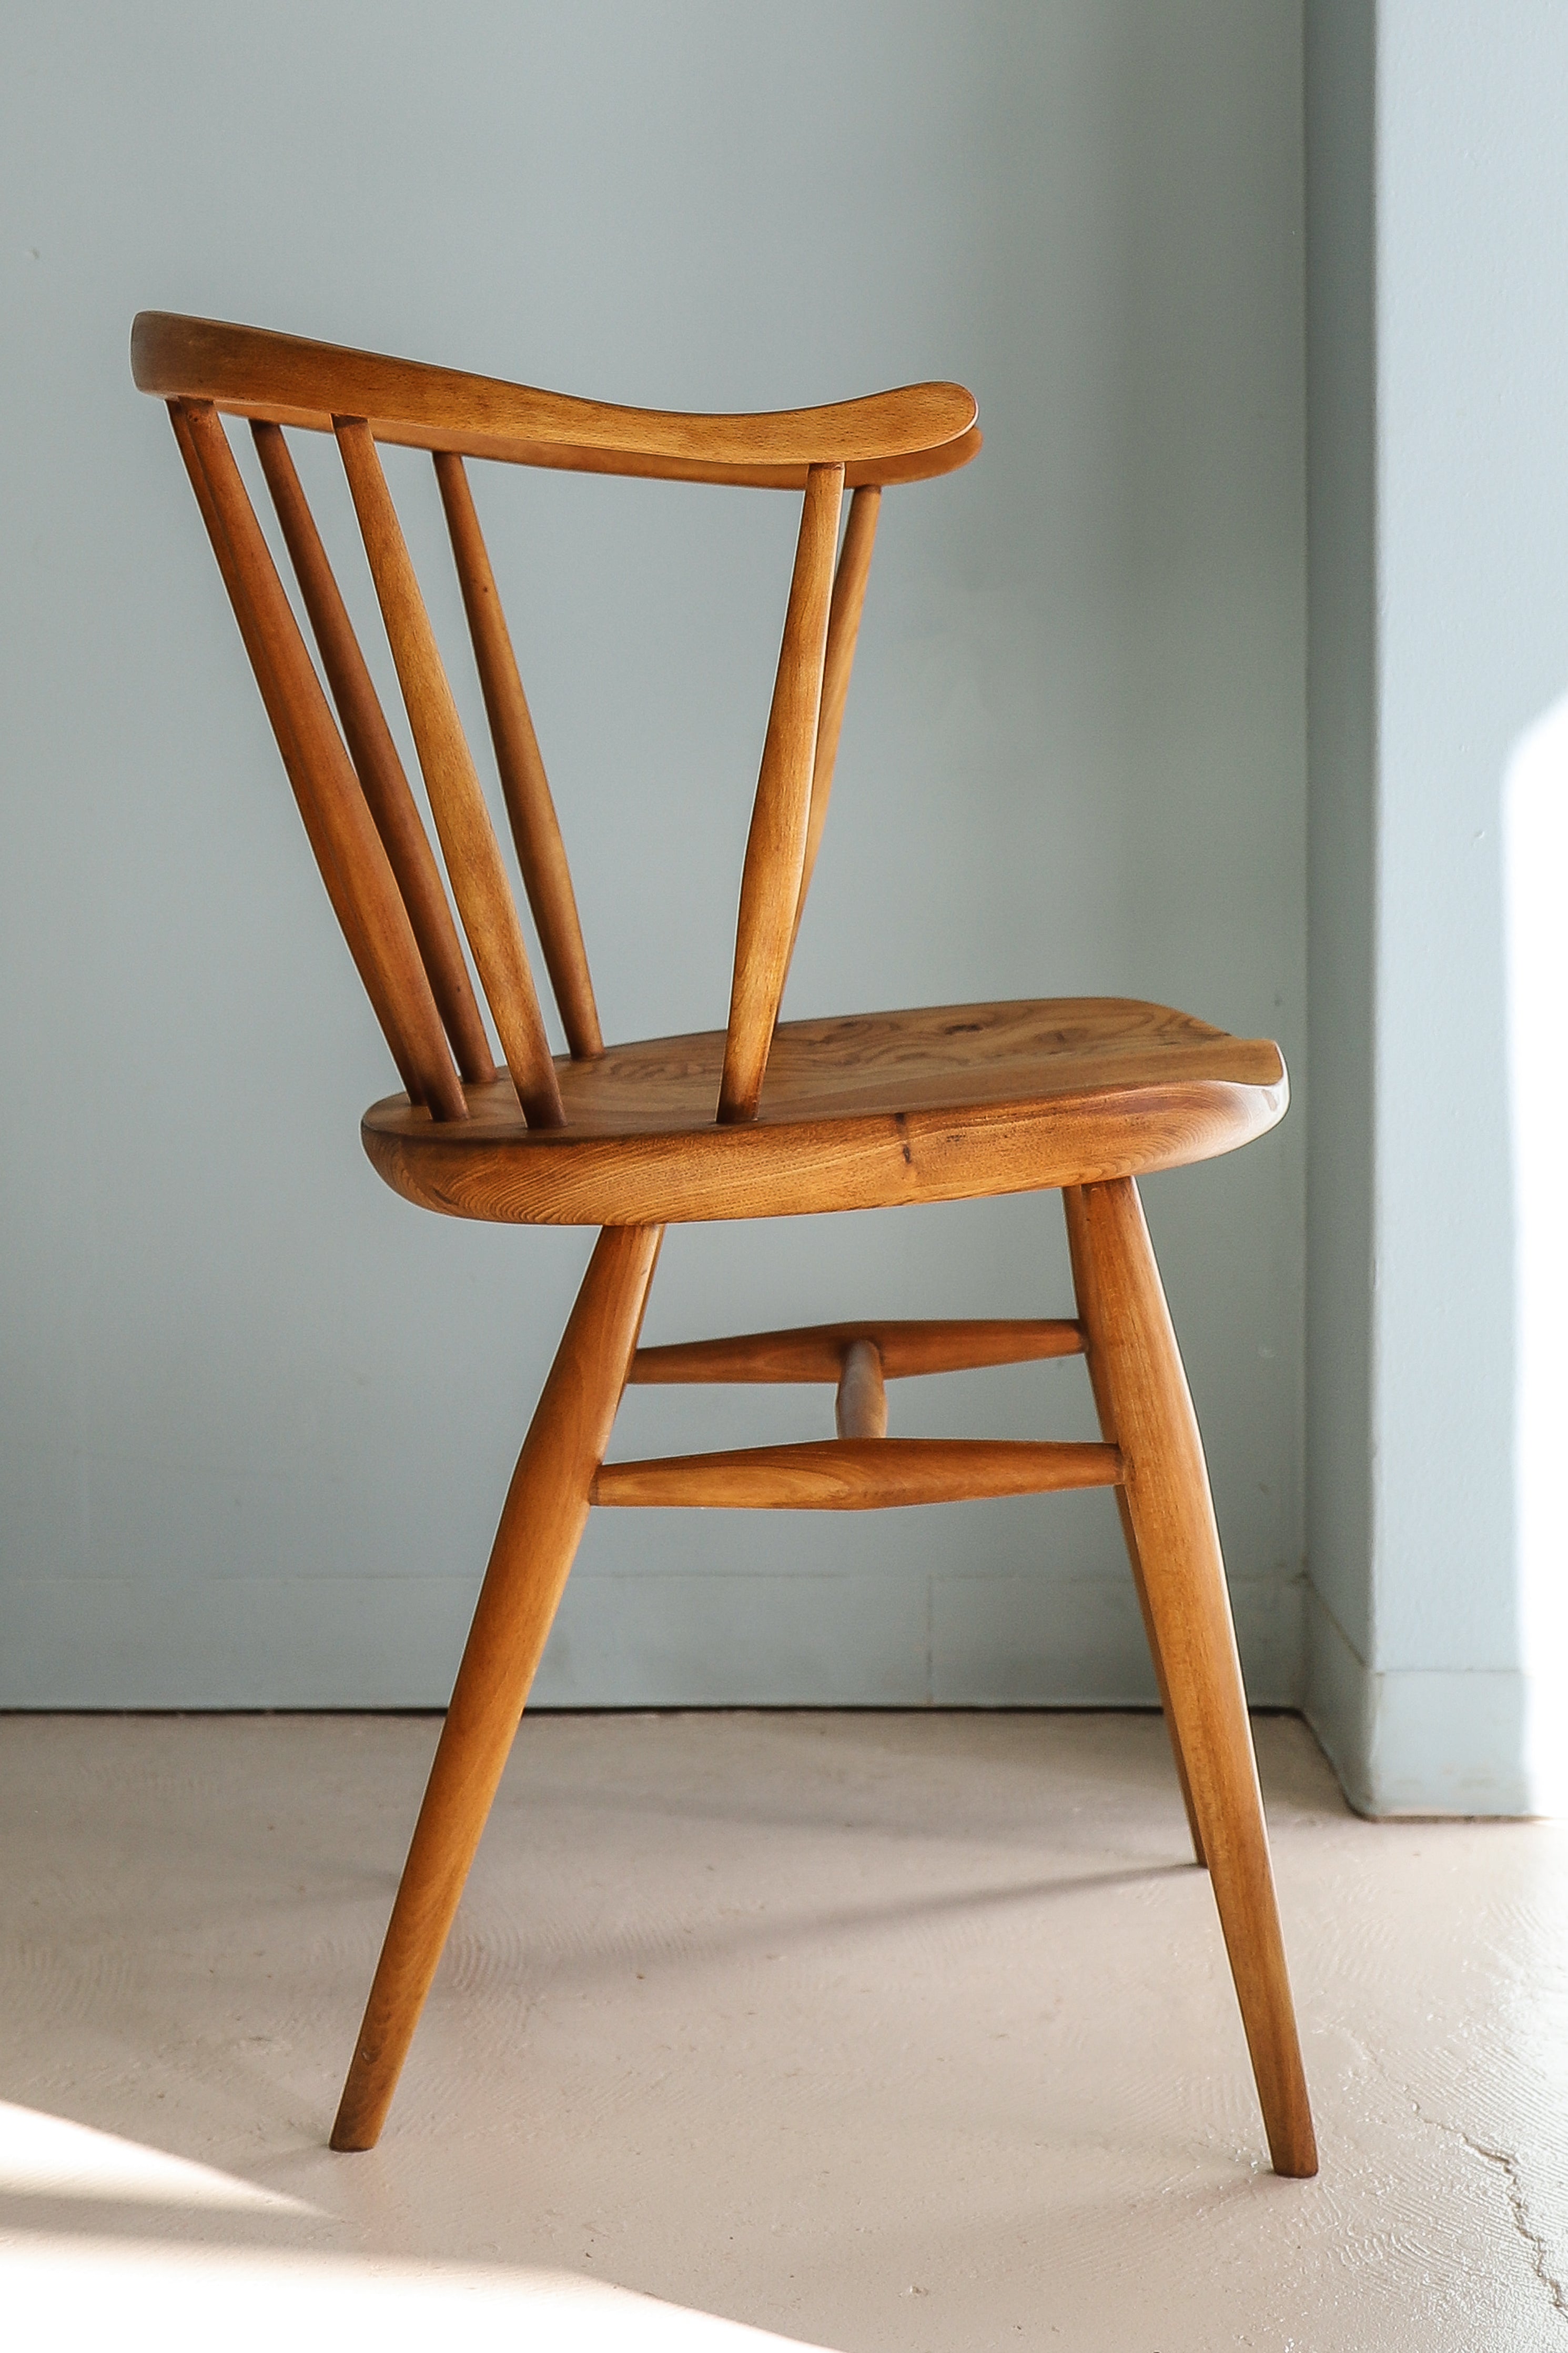 1950’s UK Vintage Ercol Windsor Chair Model 449A Cowhorn Smoker’s/イギリスヴィンテージ アーコール ウィンザーチェア カウホーン スモーカーズ 椅子